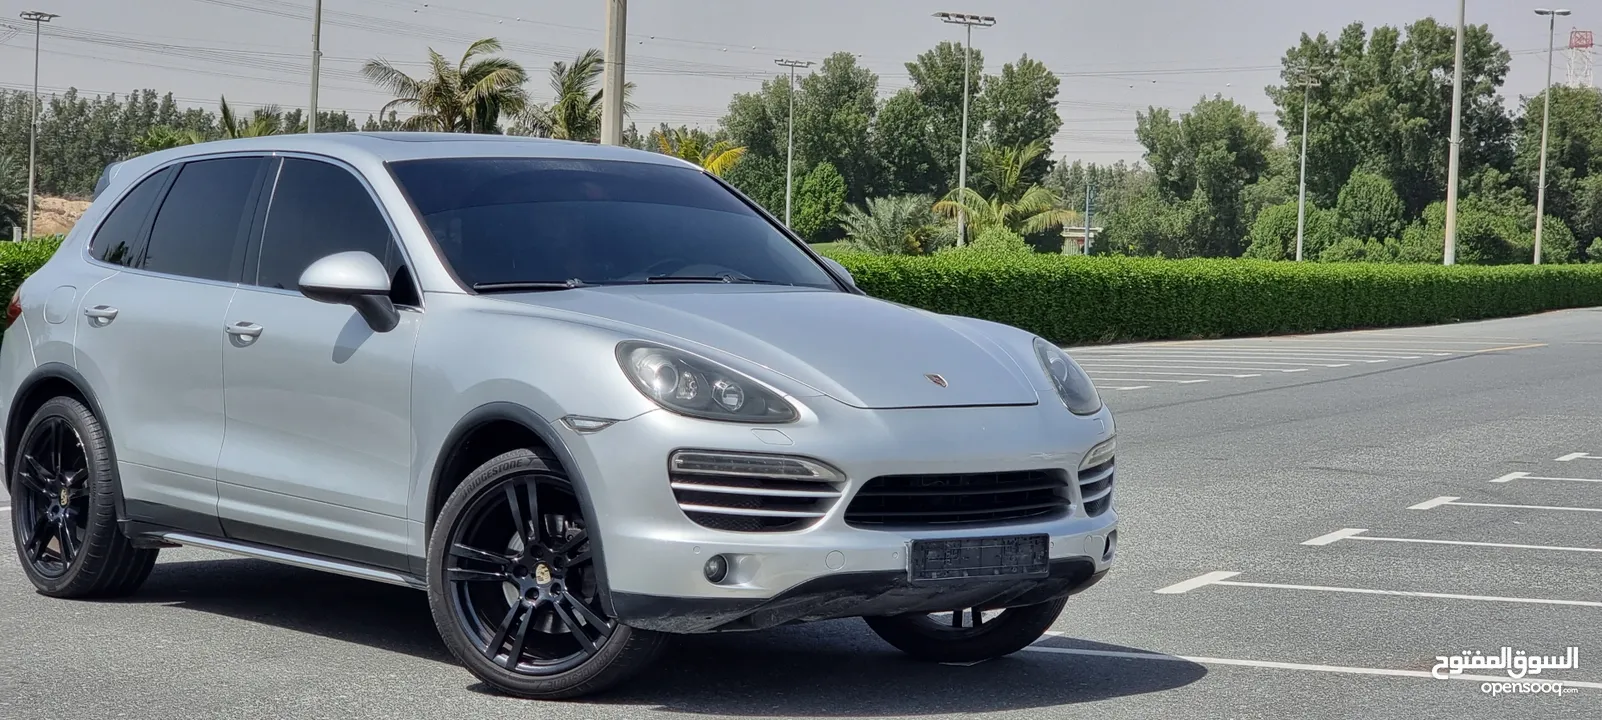 Porsche 6 cylinder / Gulf / 2012, panorama, number one, full specifications, agency condition